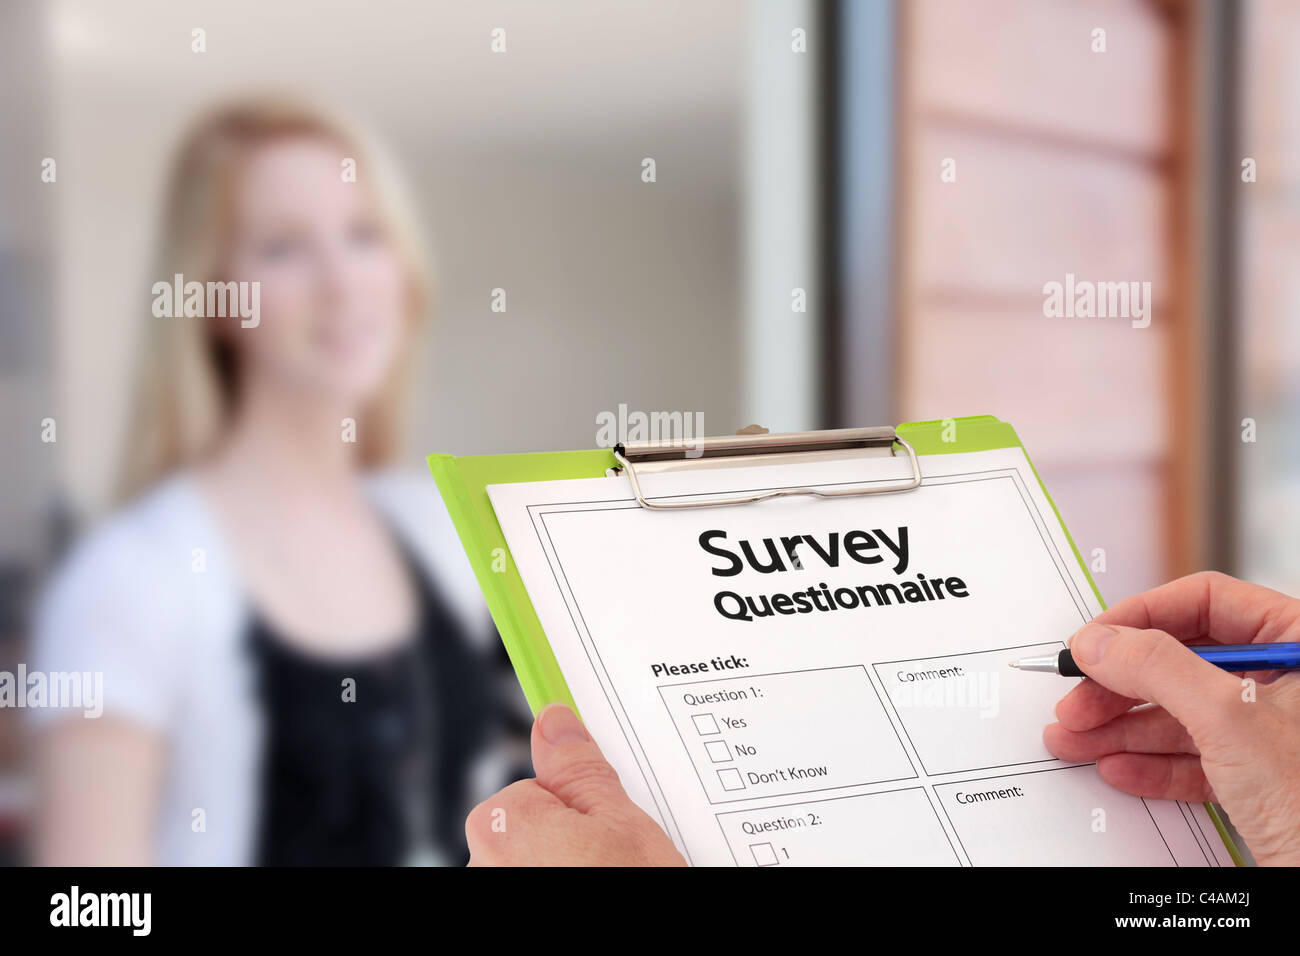 Girl Answering Market Research Survey Questionnaire at the Door Stock ...